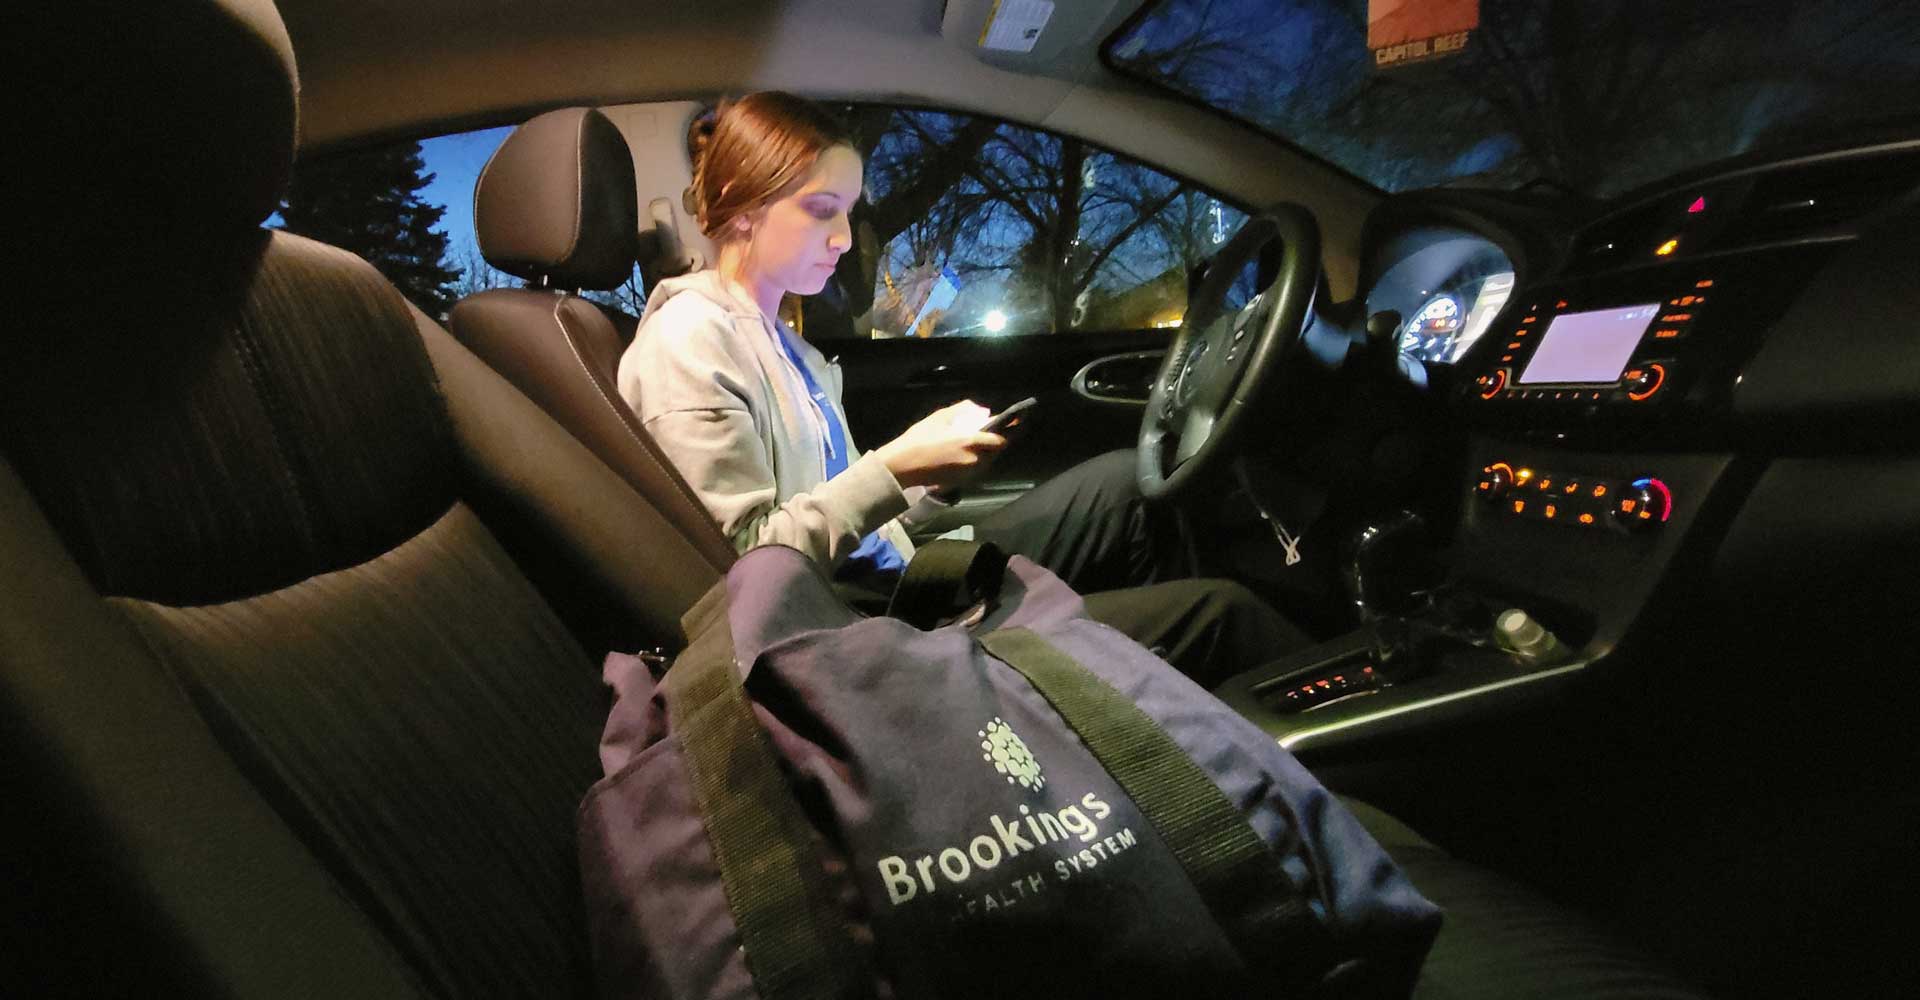 Hallie, a home health aide sitting inside her car, charting a patient visit on her cell phone